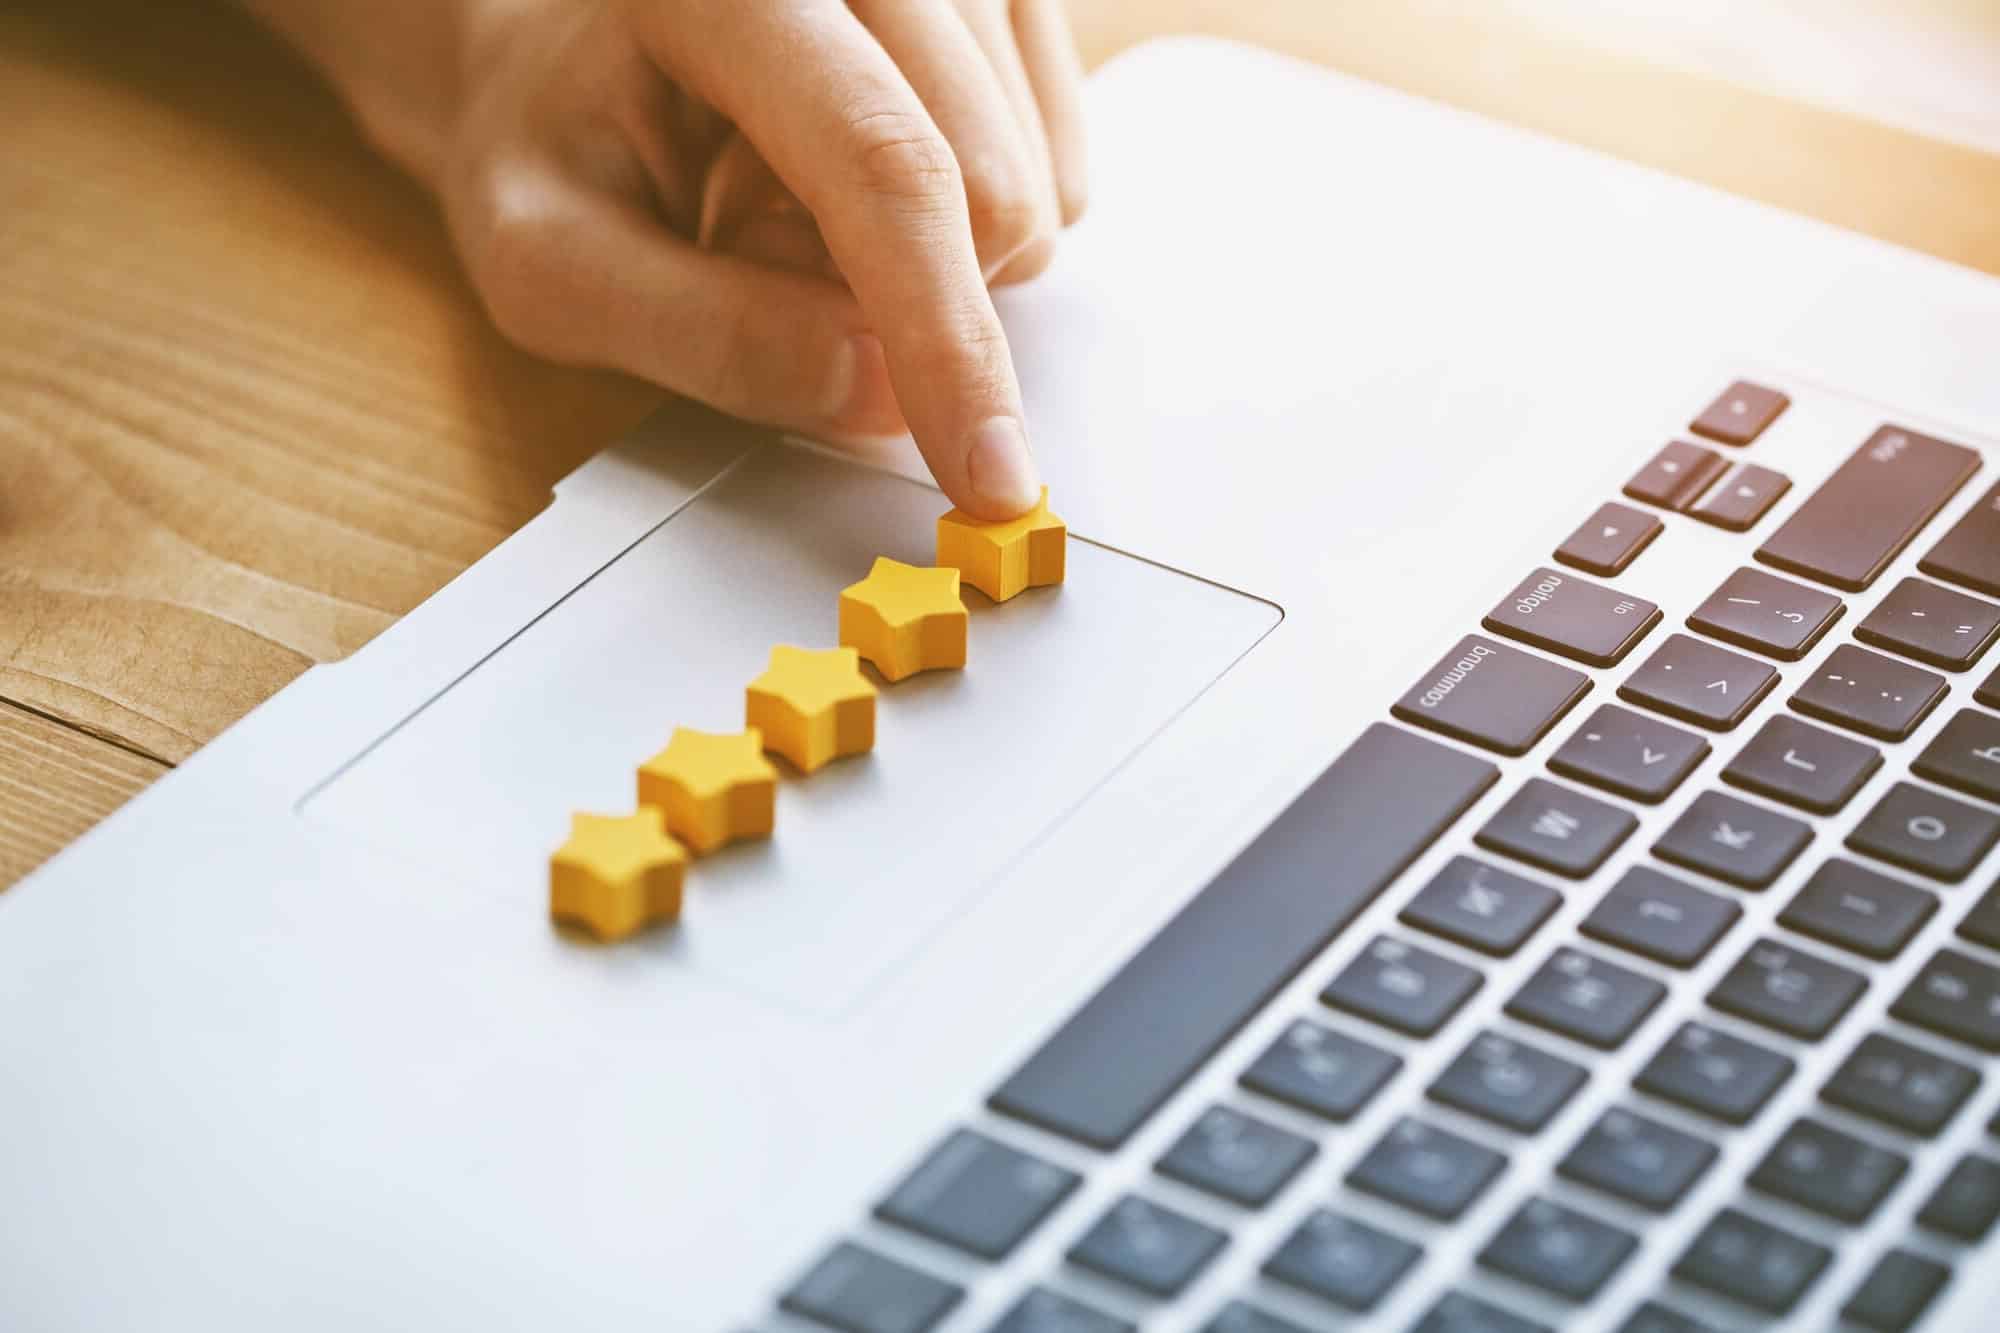 A hand putting yellow stars on their laptop trackpad to represent reviews